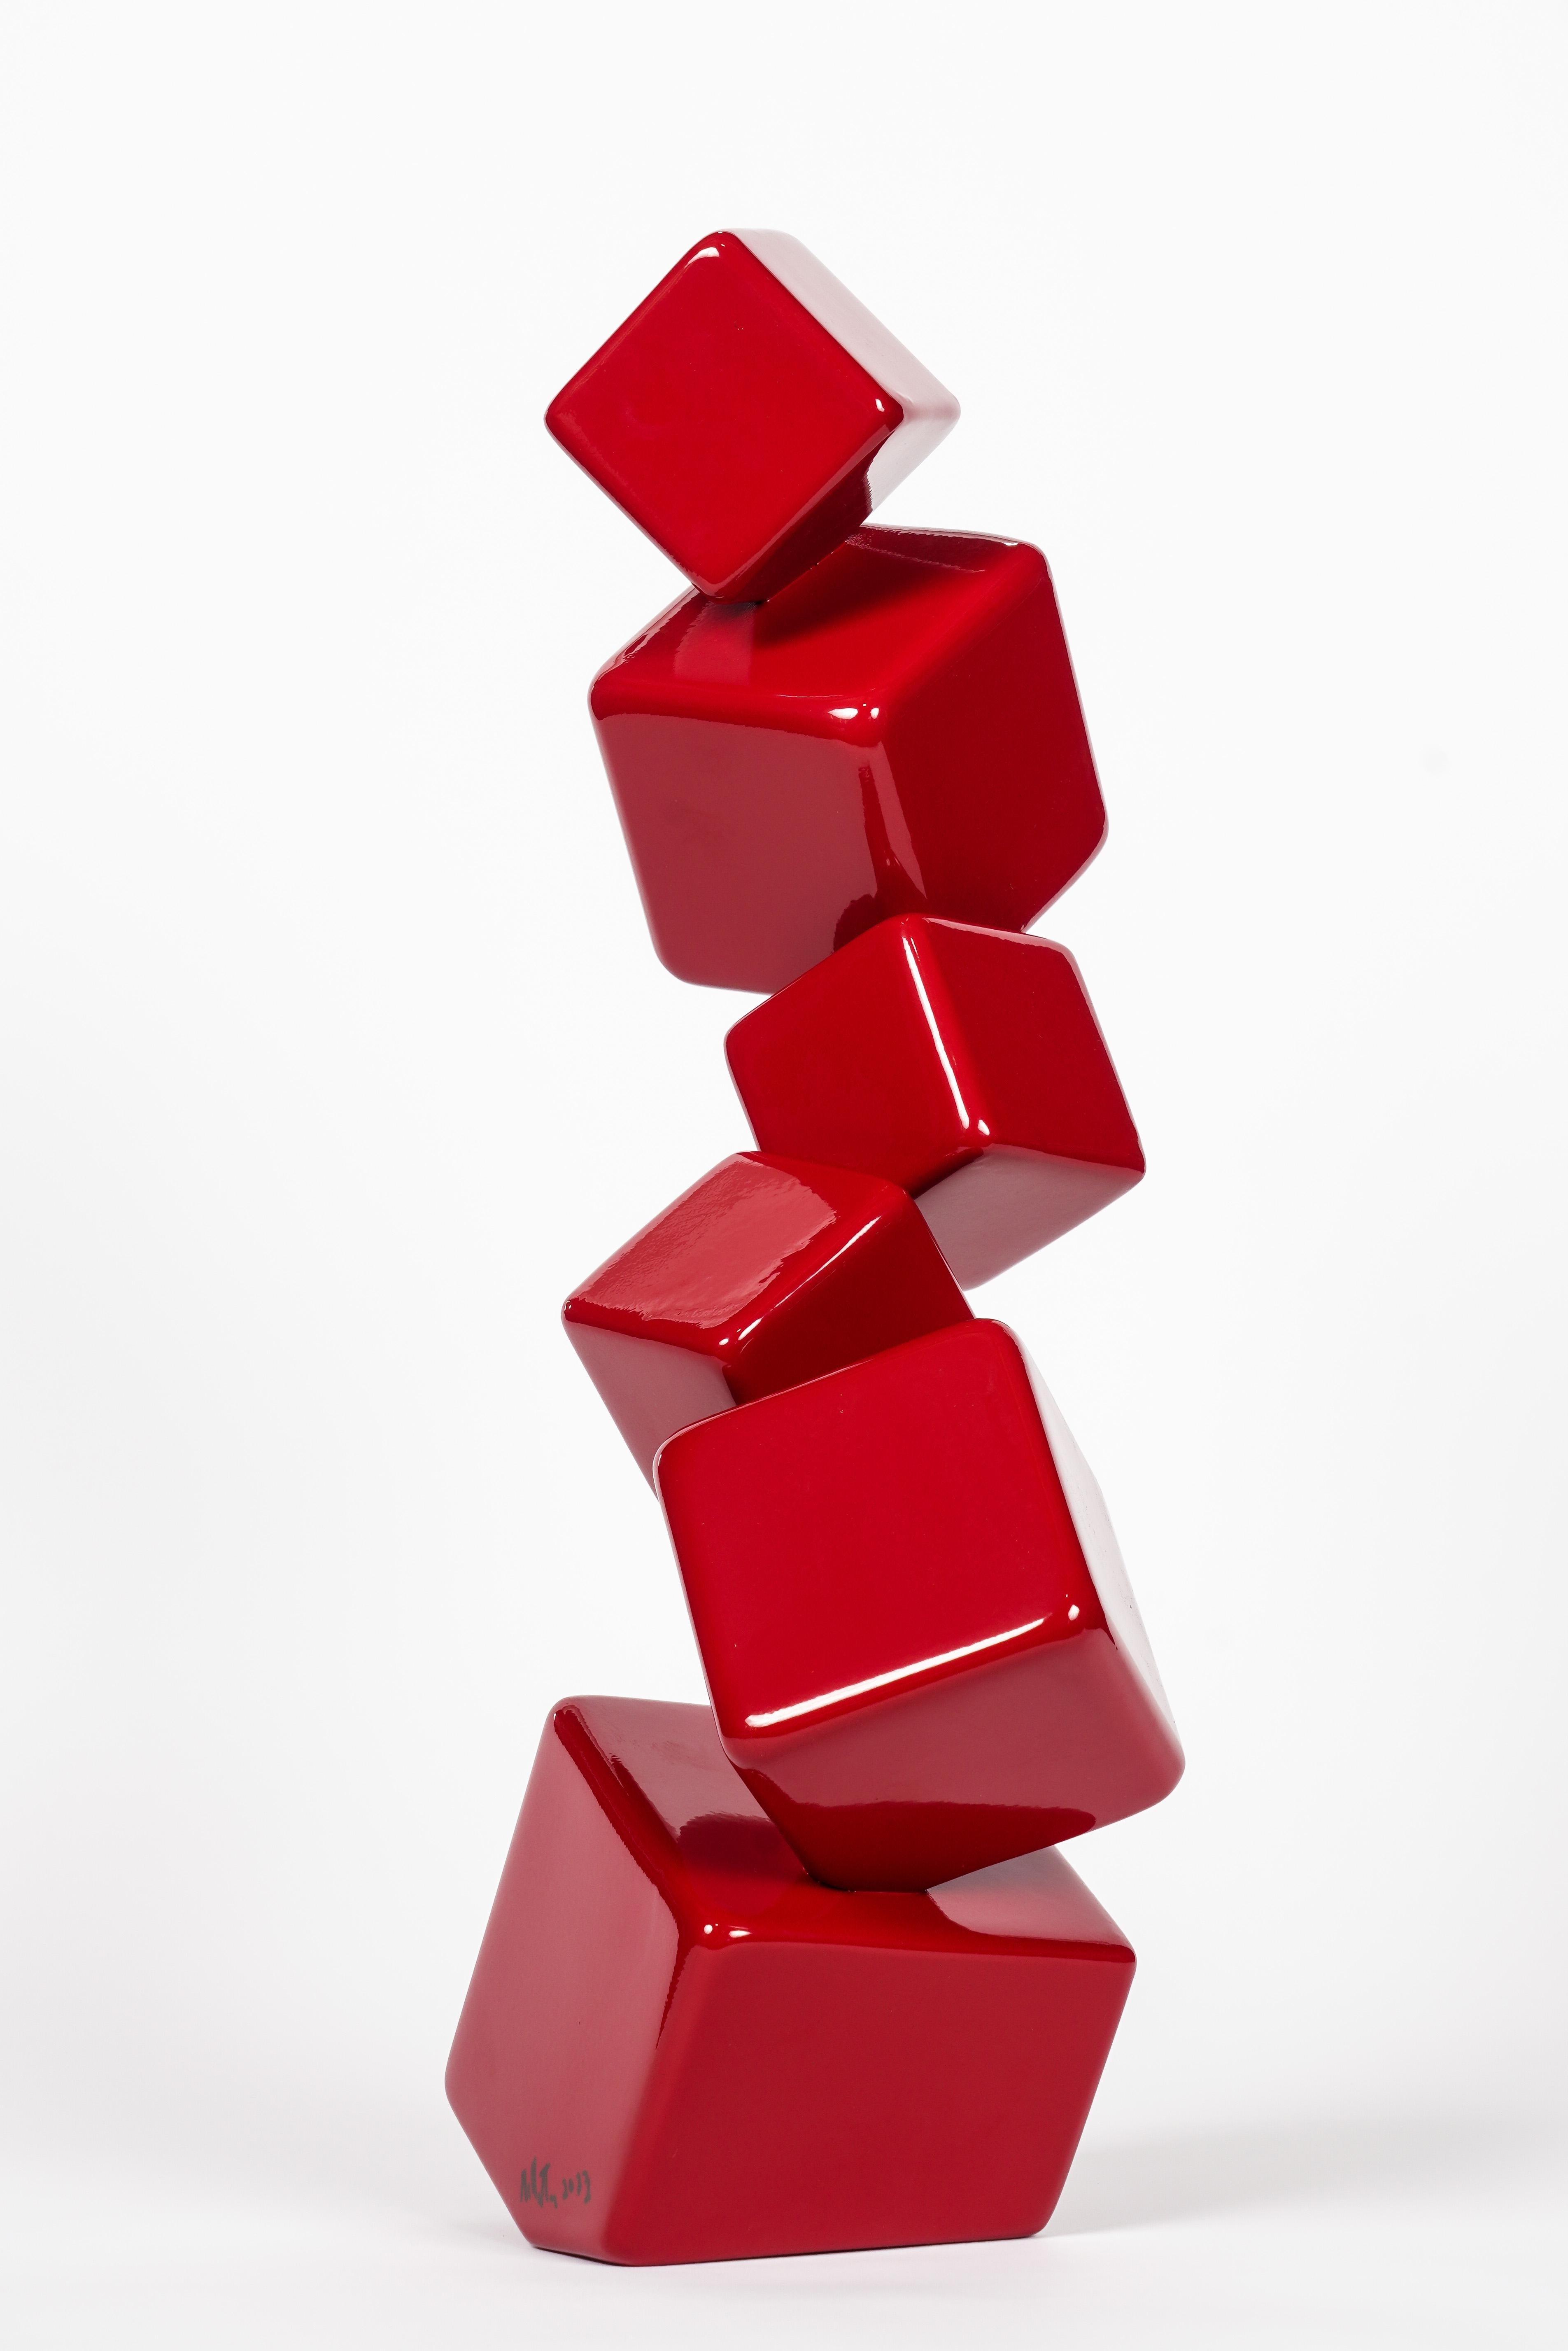 Effervescence IV - small, geometric, abstract, powder coated steel sculpture - Sculpture by Claude Millette